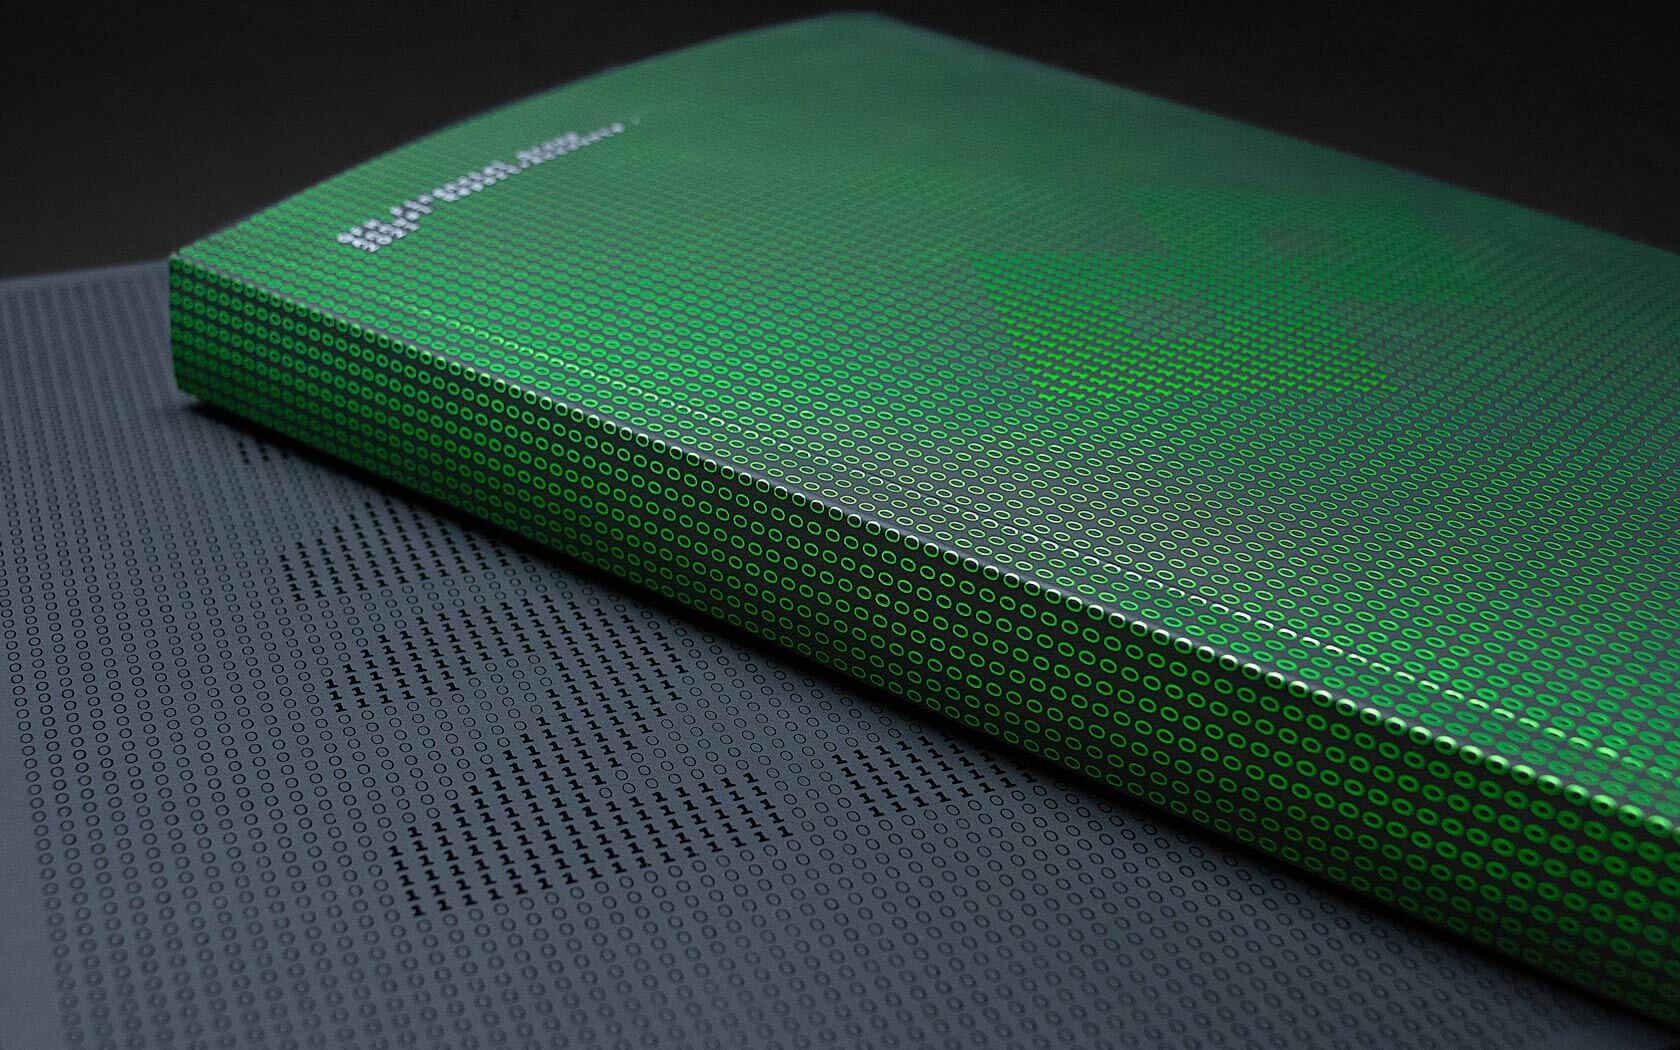 GFH Annual Report cover with foil treatment